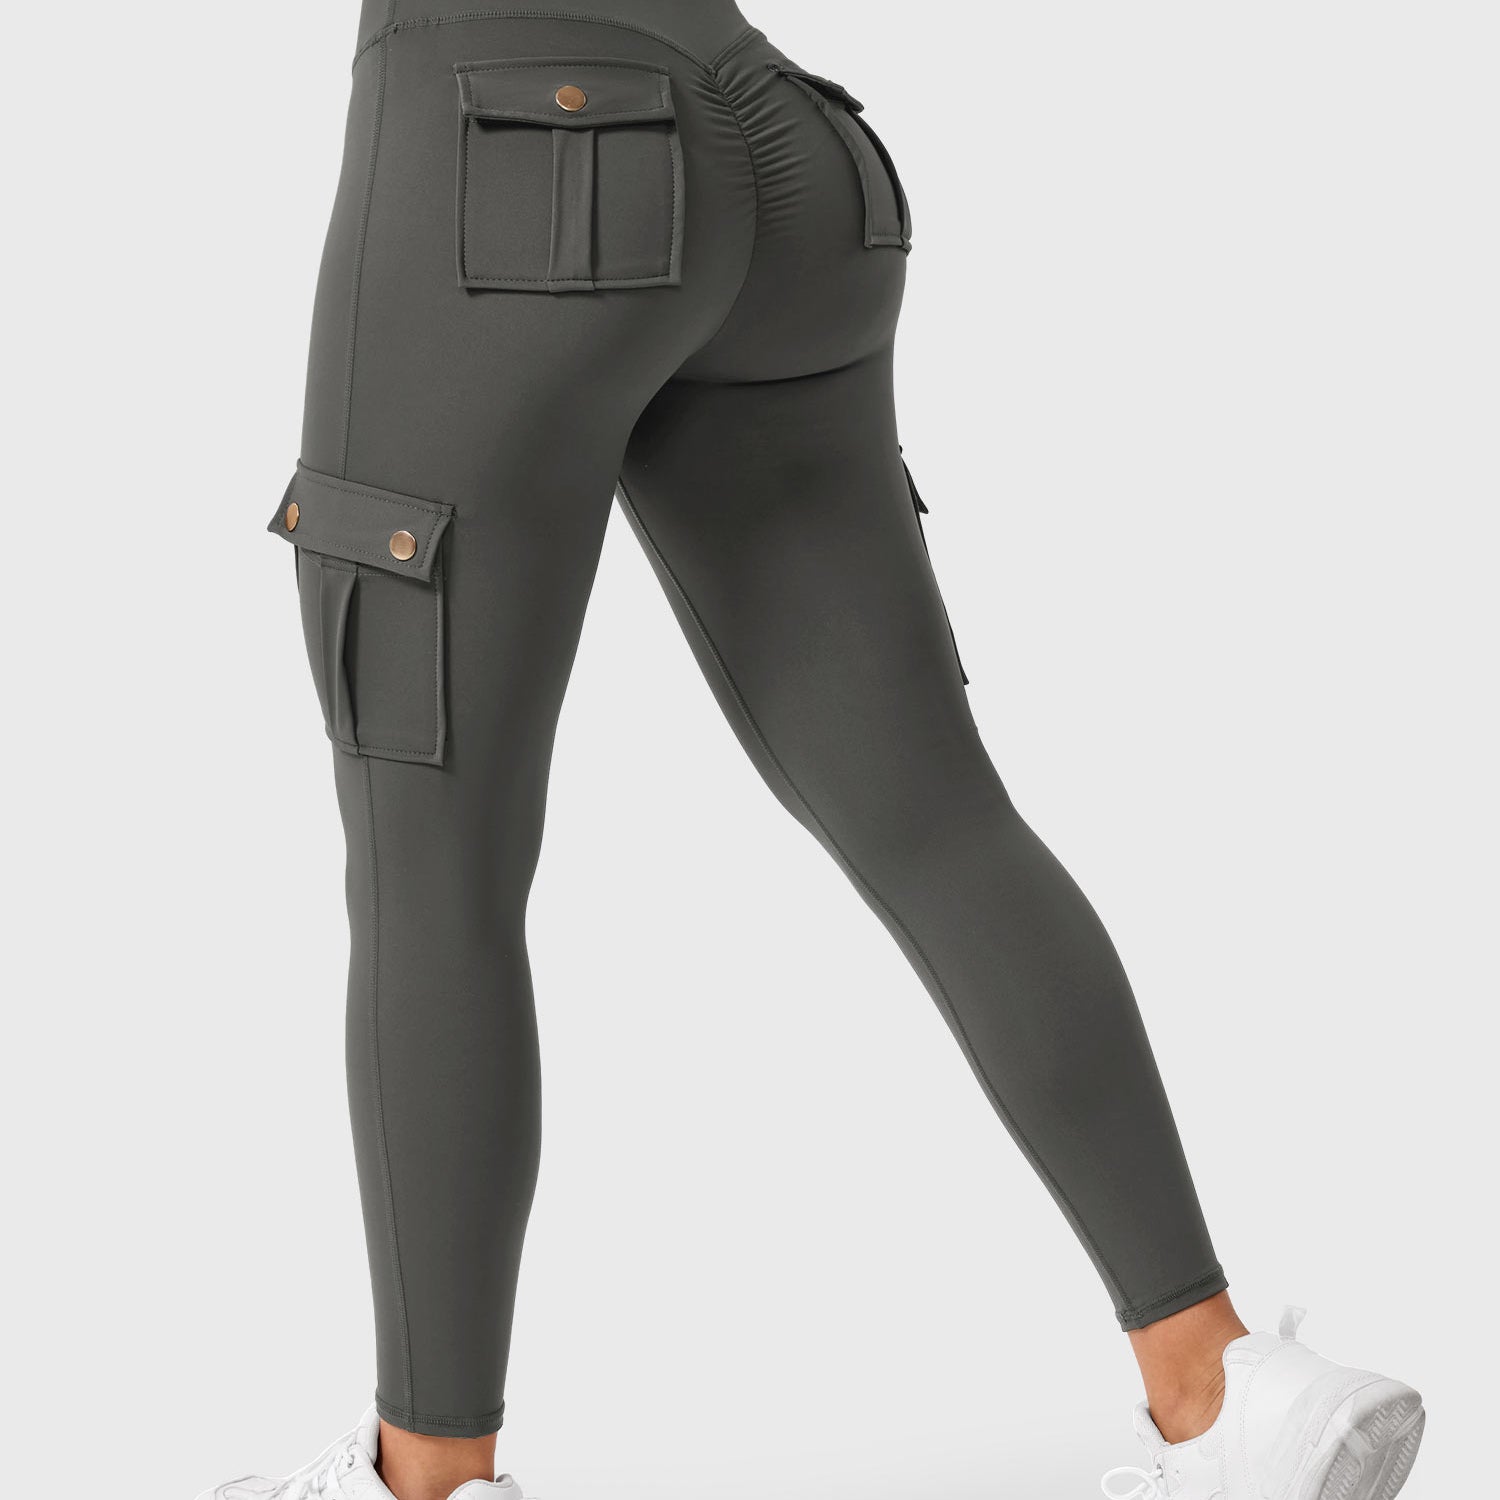 Yeoreo Cargo Scrunch Leggings with Pockets